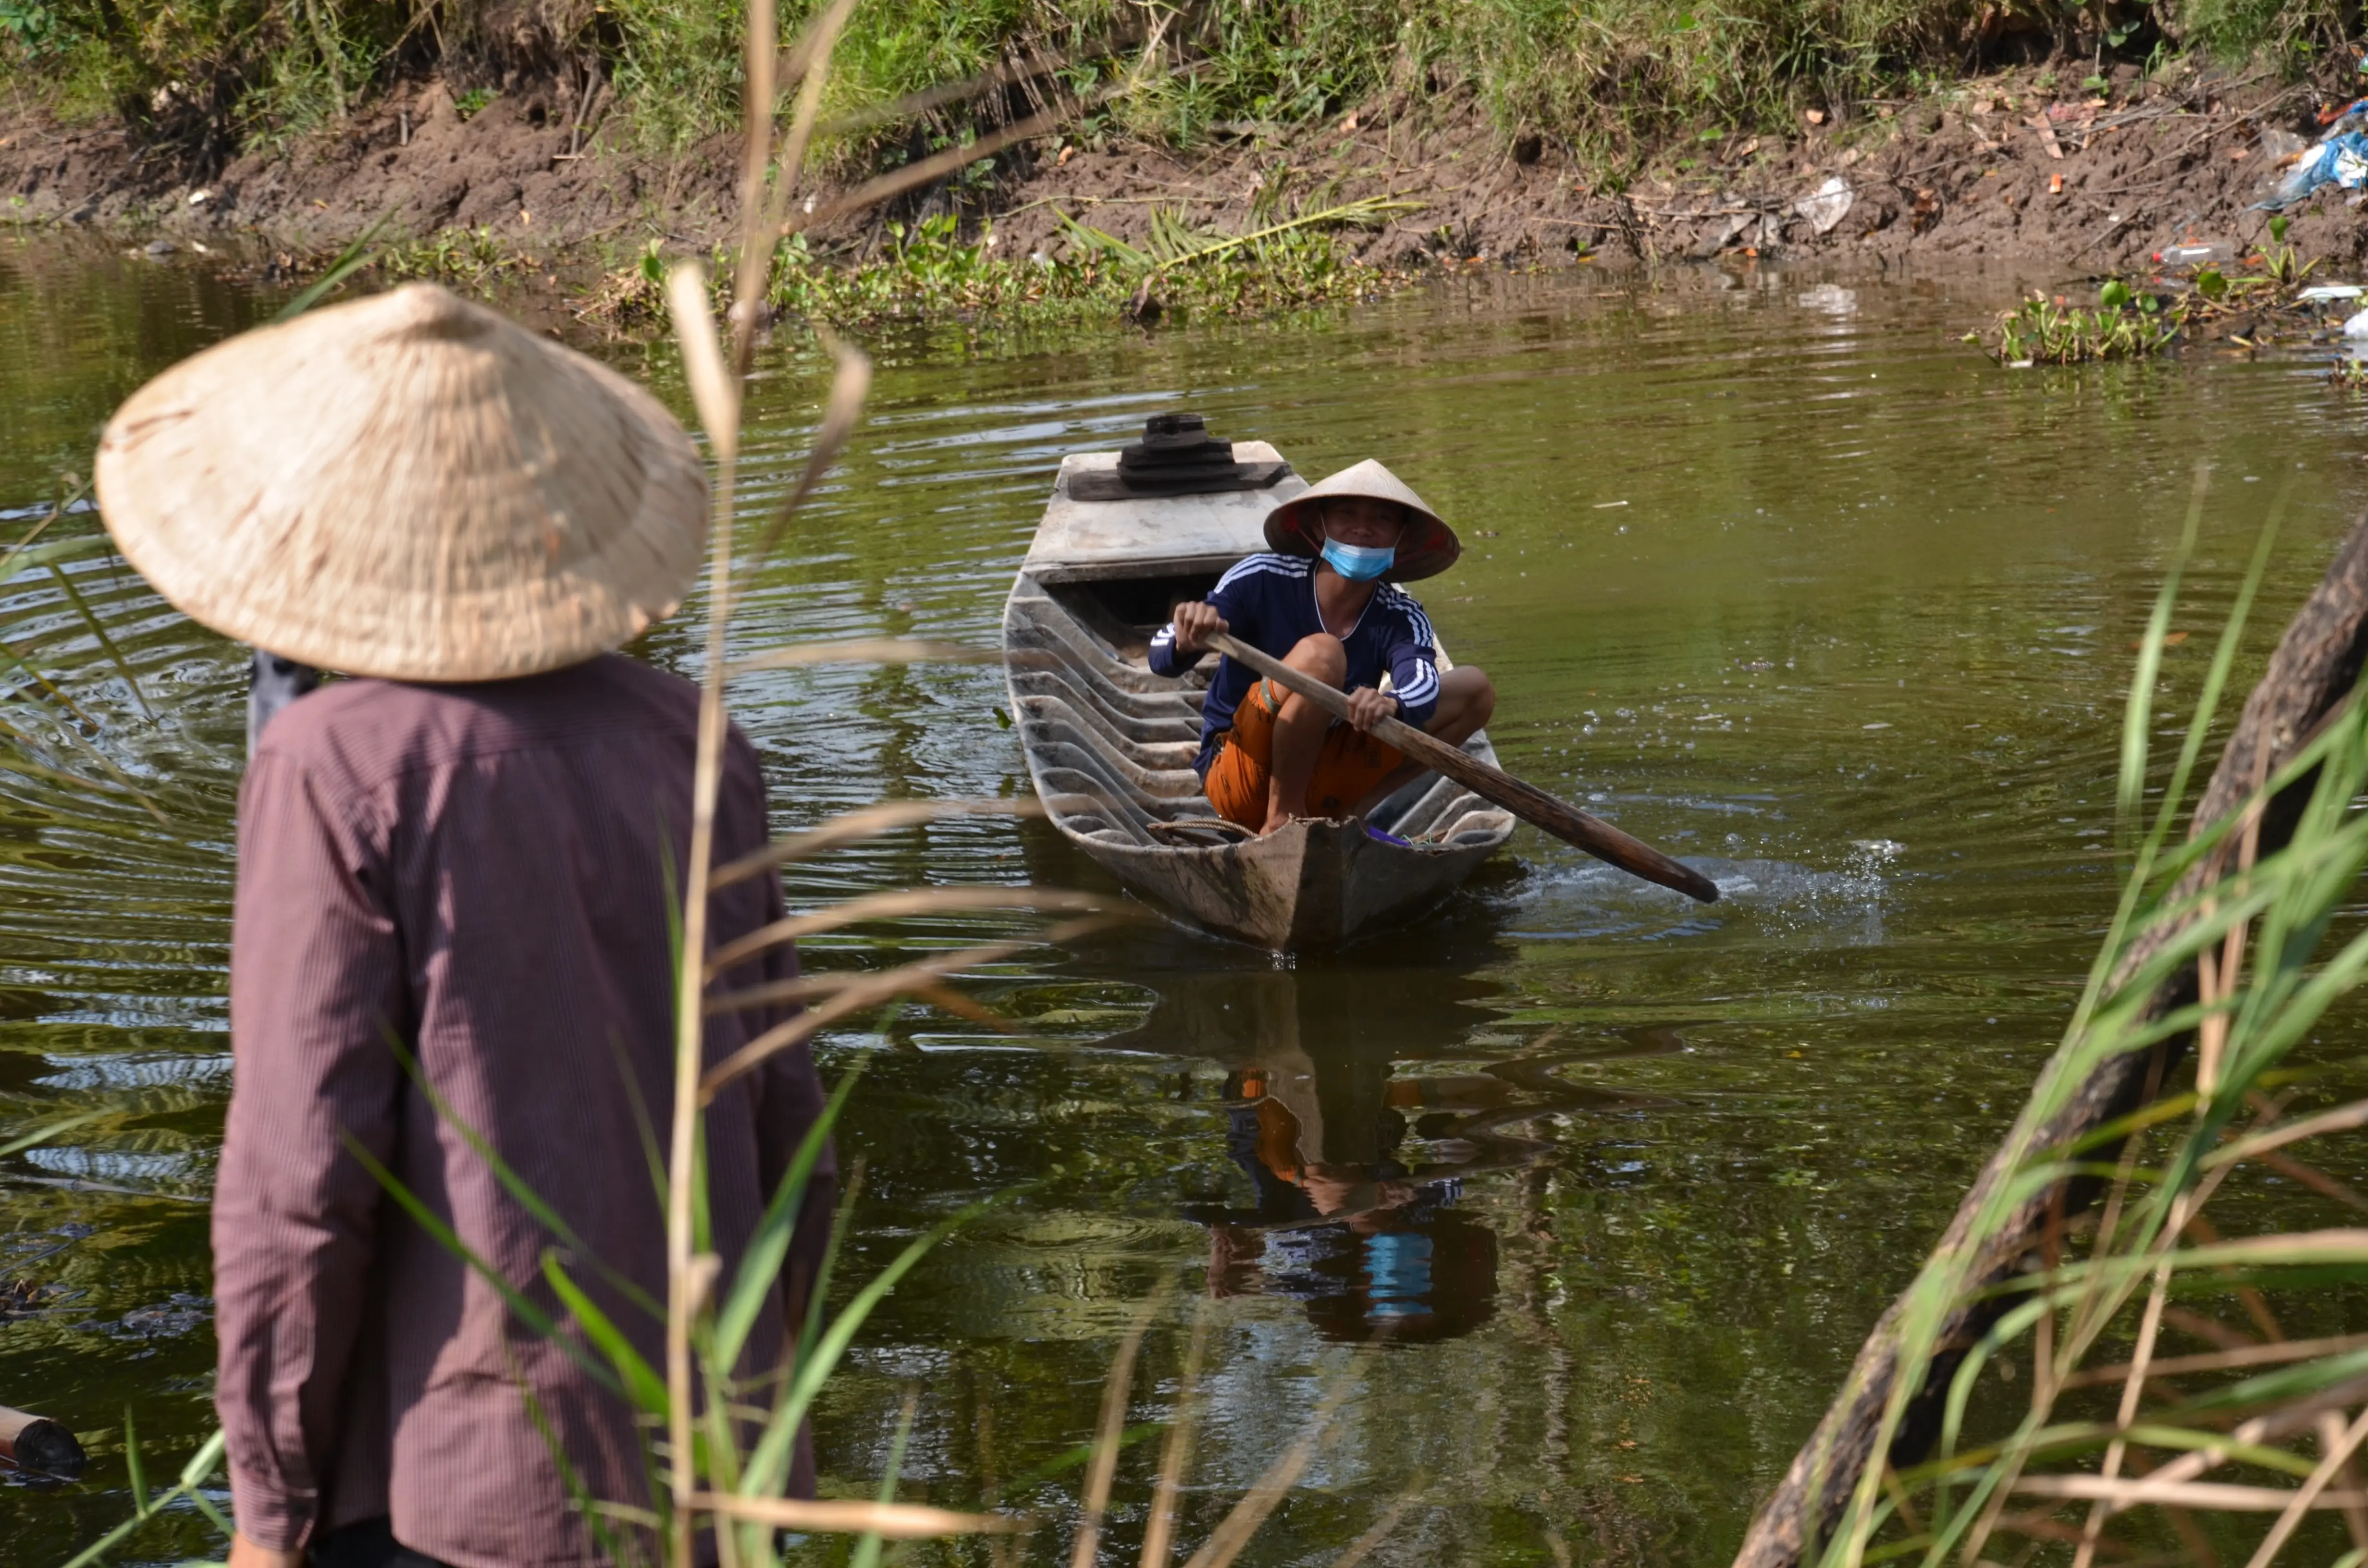 Locals at Viet Nam’s U Minh Thuong National Park, located in Lower Mekong Delta 